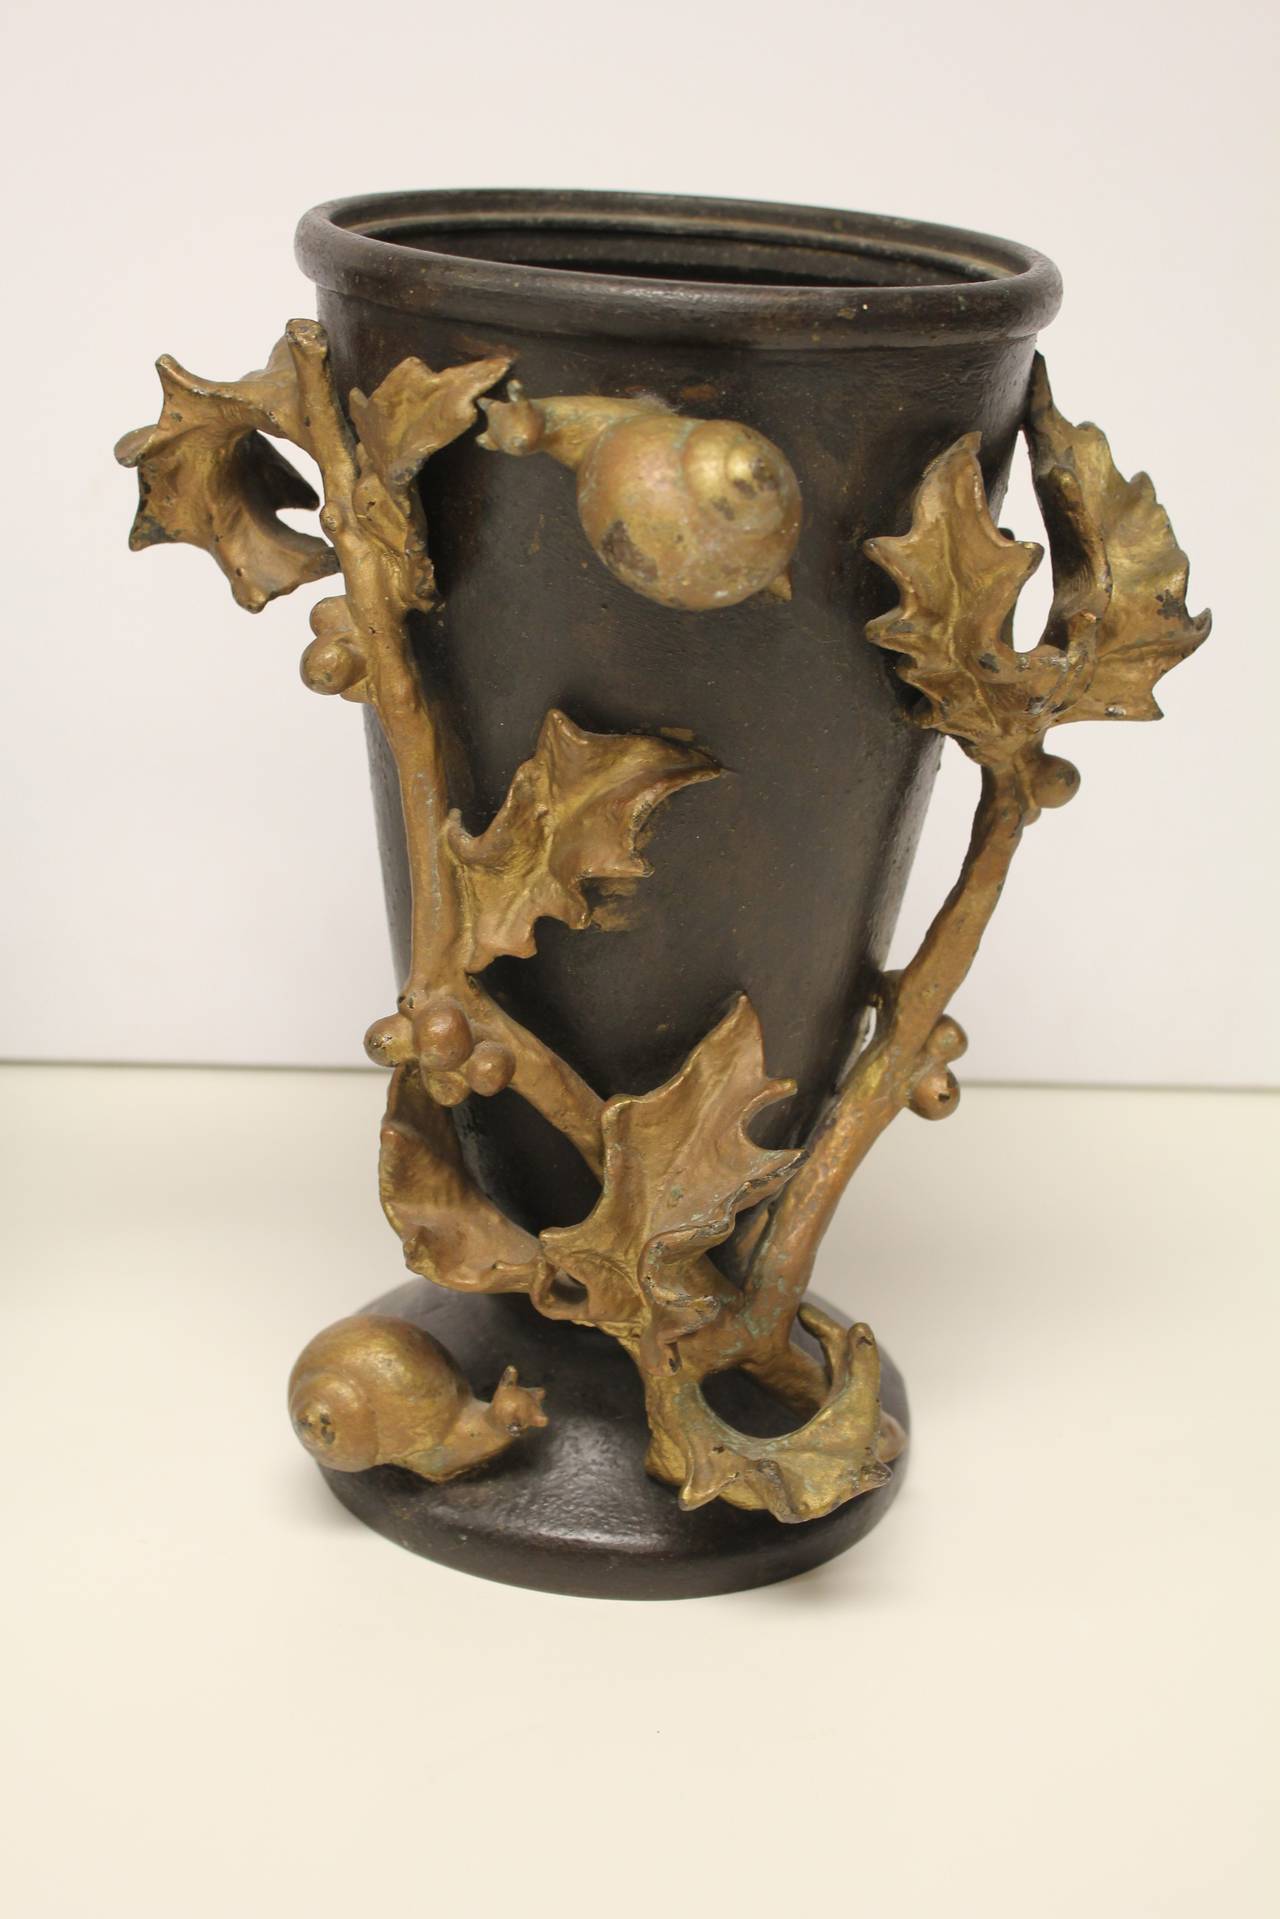 19th Century Art Nouveau French Bronze Vases or Planters with Gilded Design